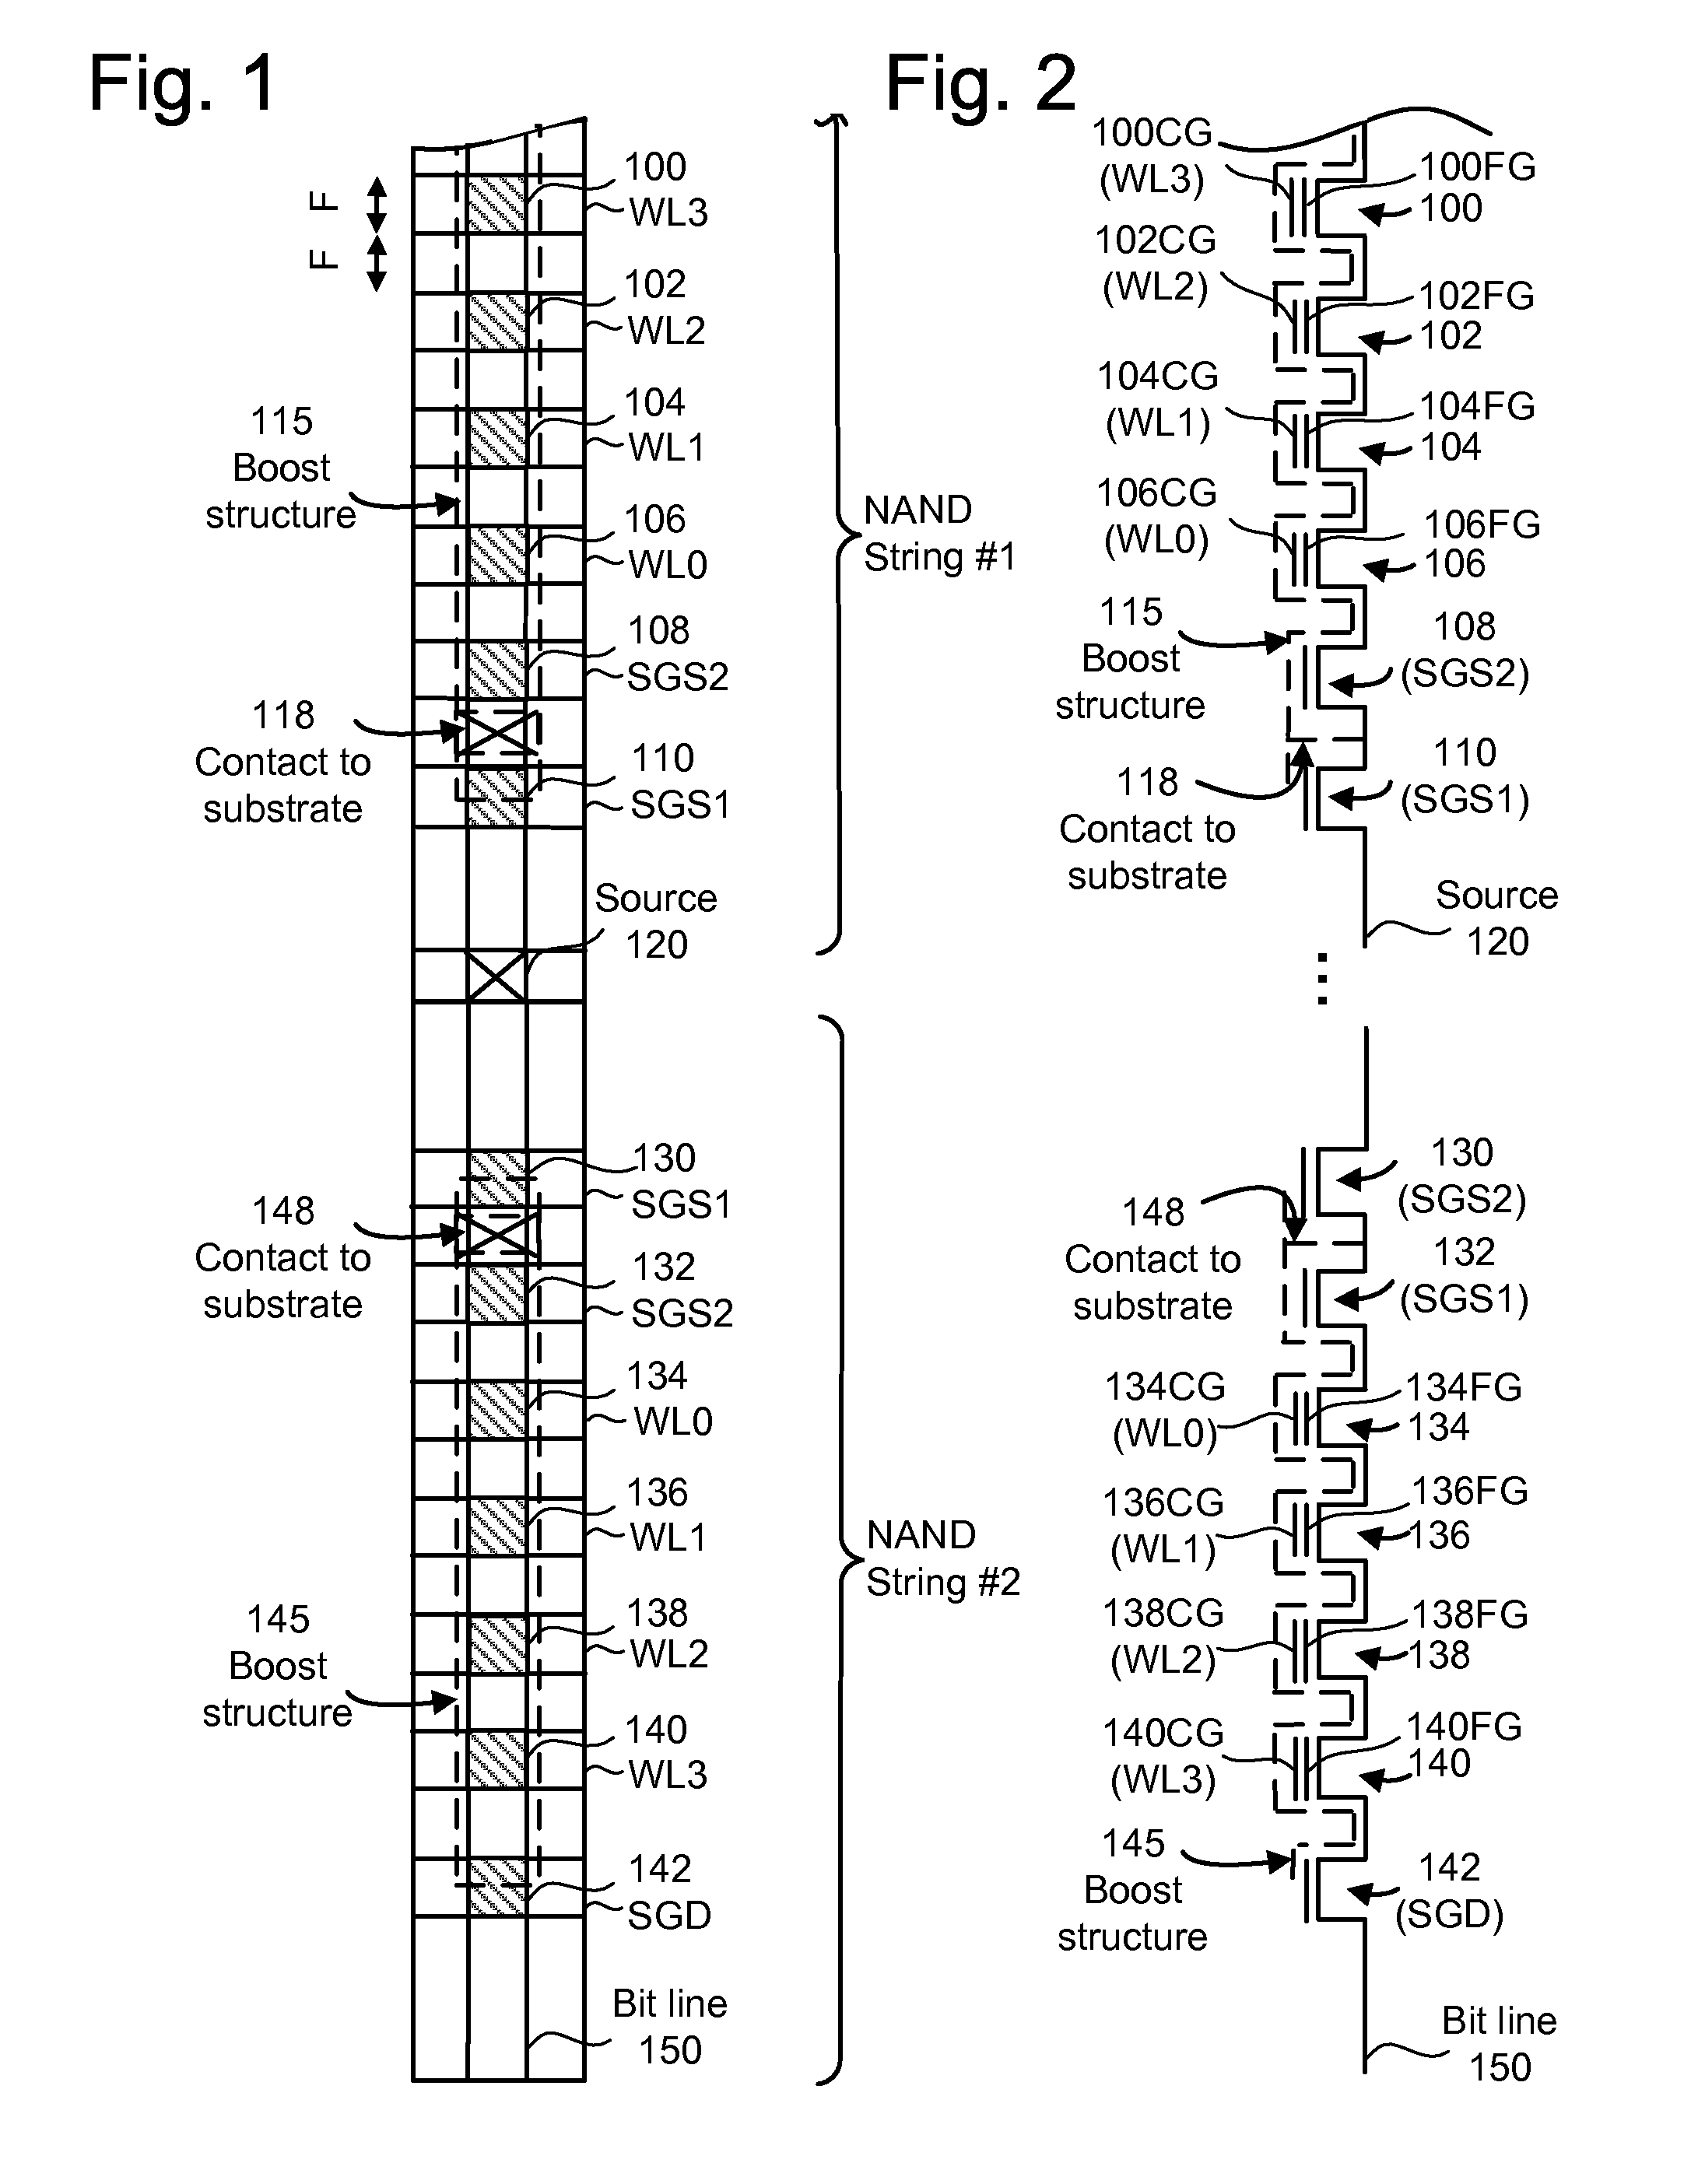 Operating non-volatile memory with boost structures